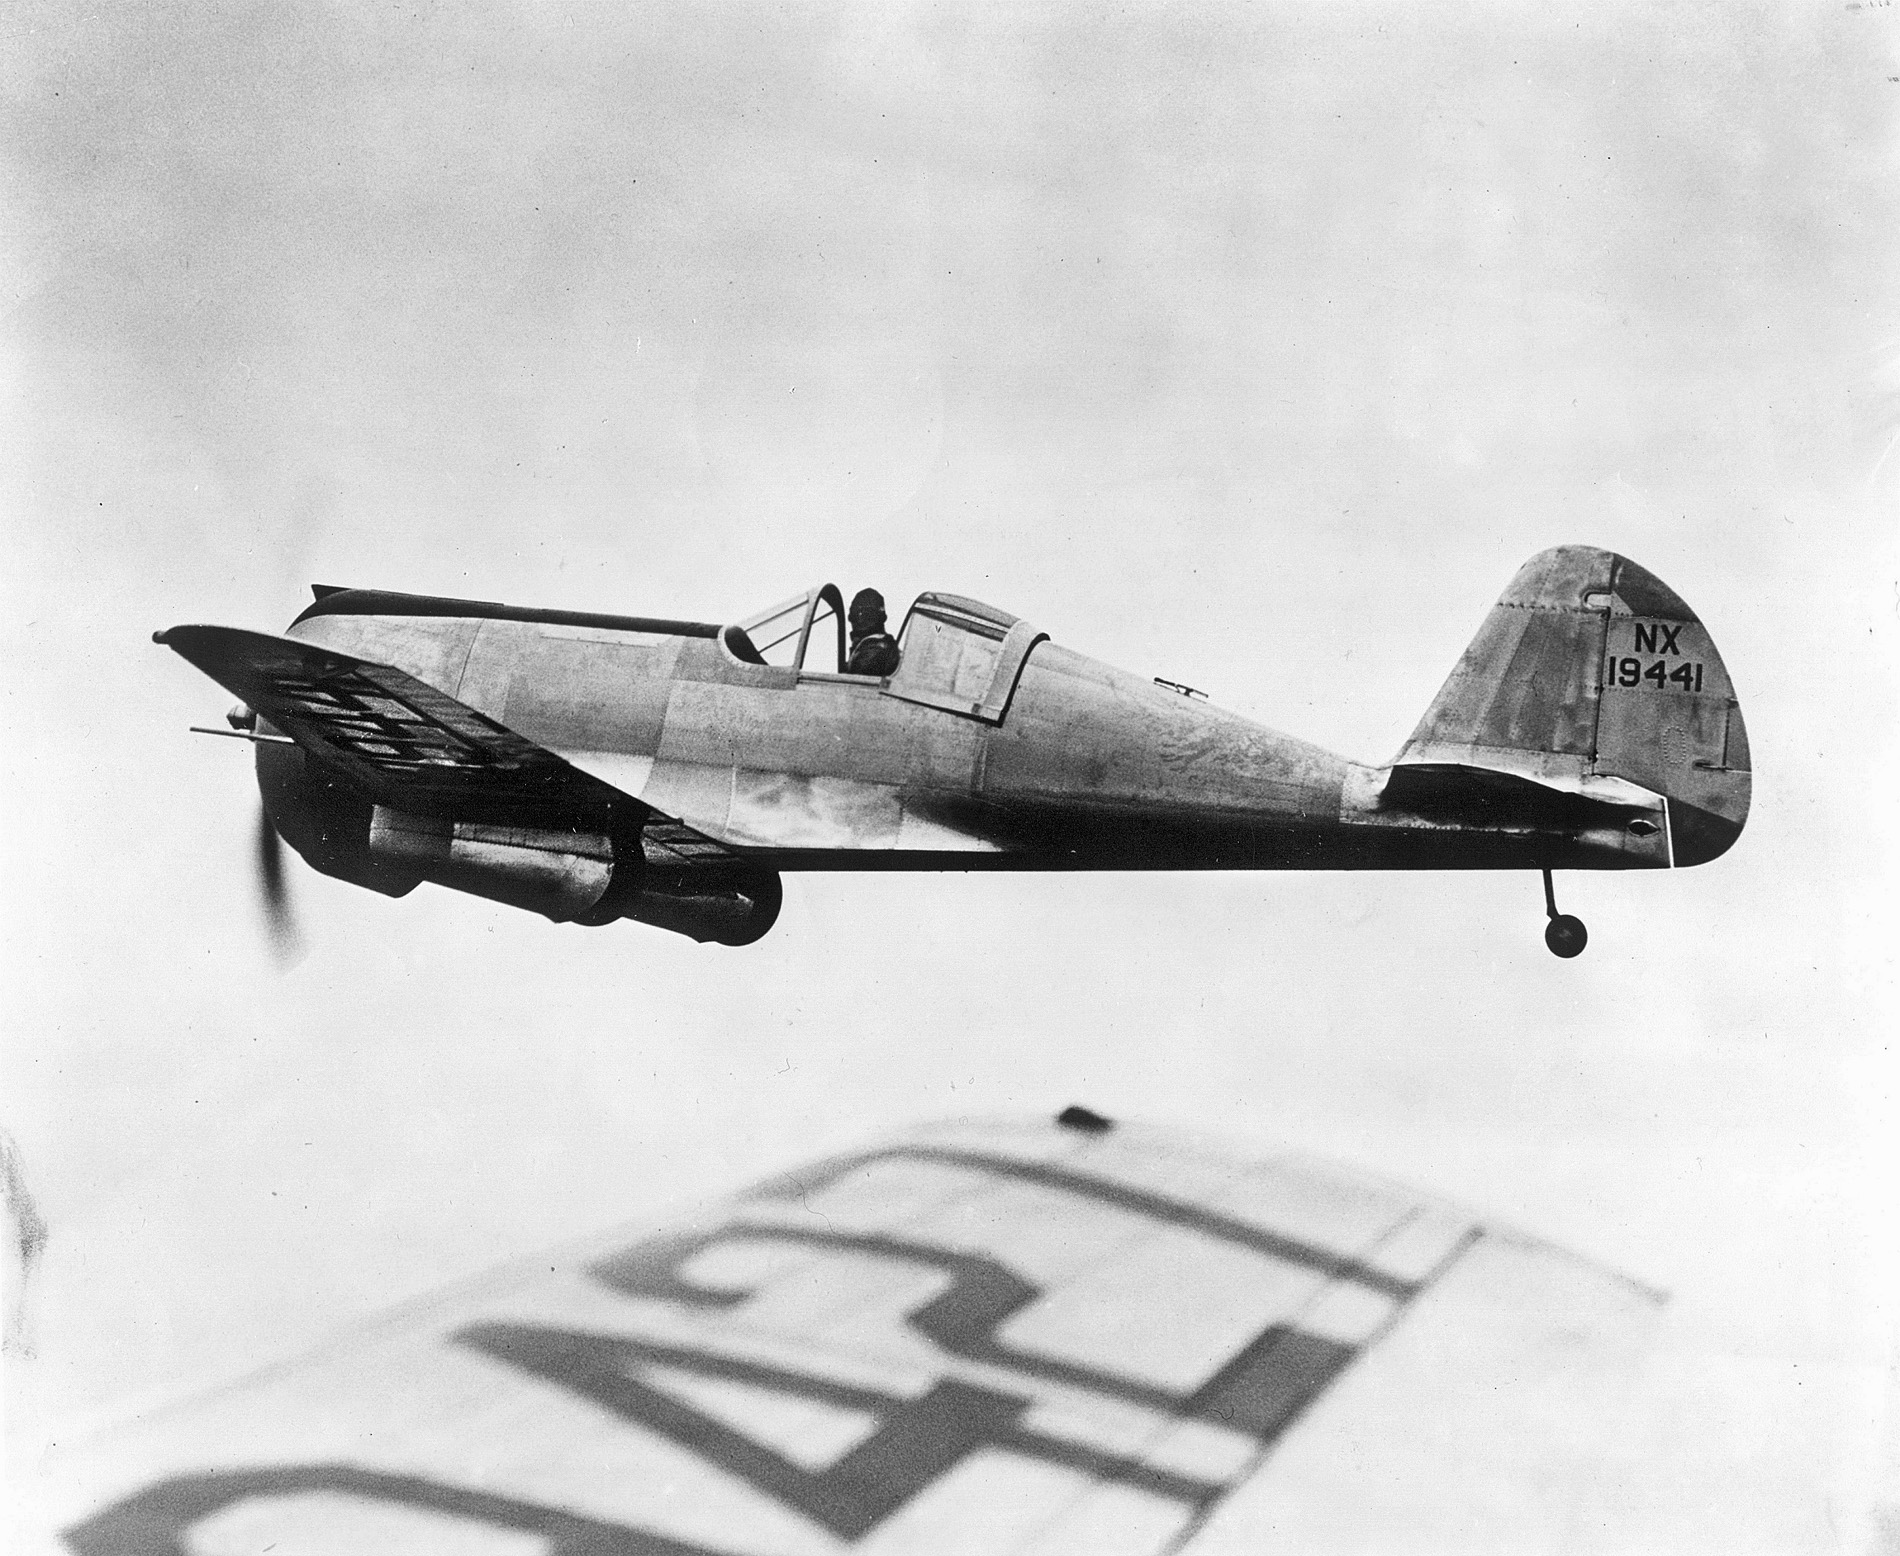 AVG pilot Erik Shilling wrote that the Demon was the most beautiful fighter plane he had ever seen, “small, sleek, and with a large radial engine that gave the impression of lots of performance.” 